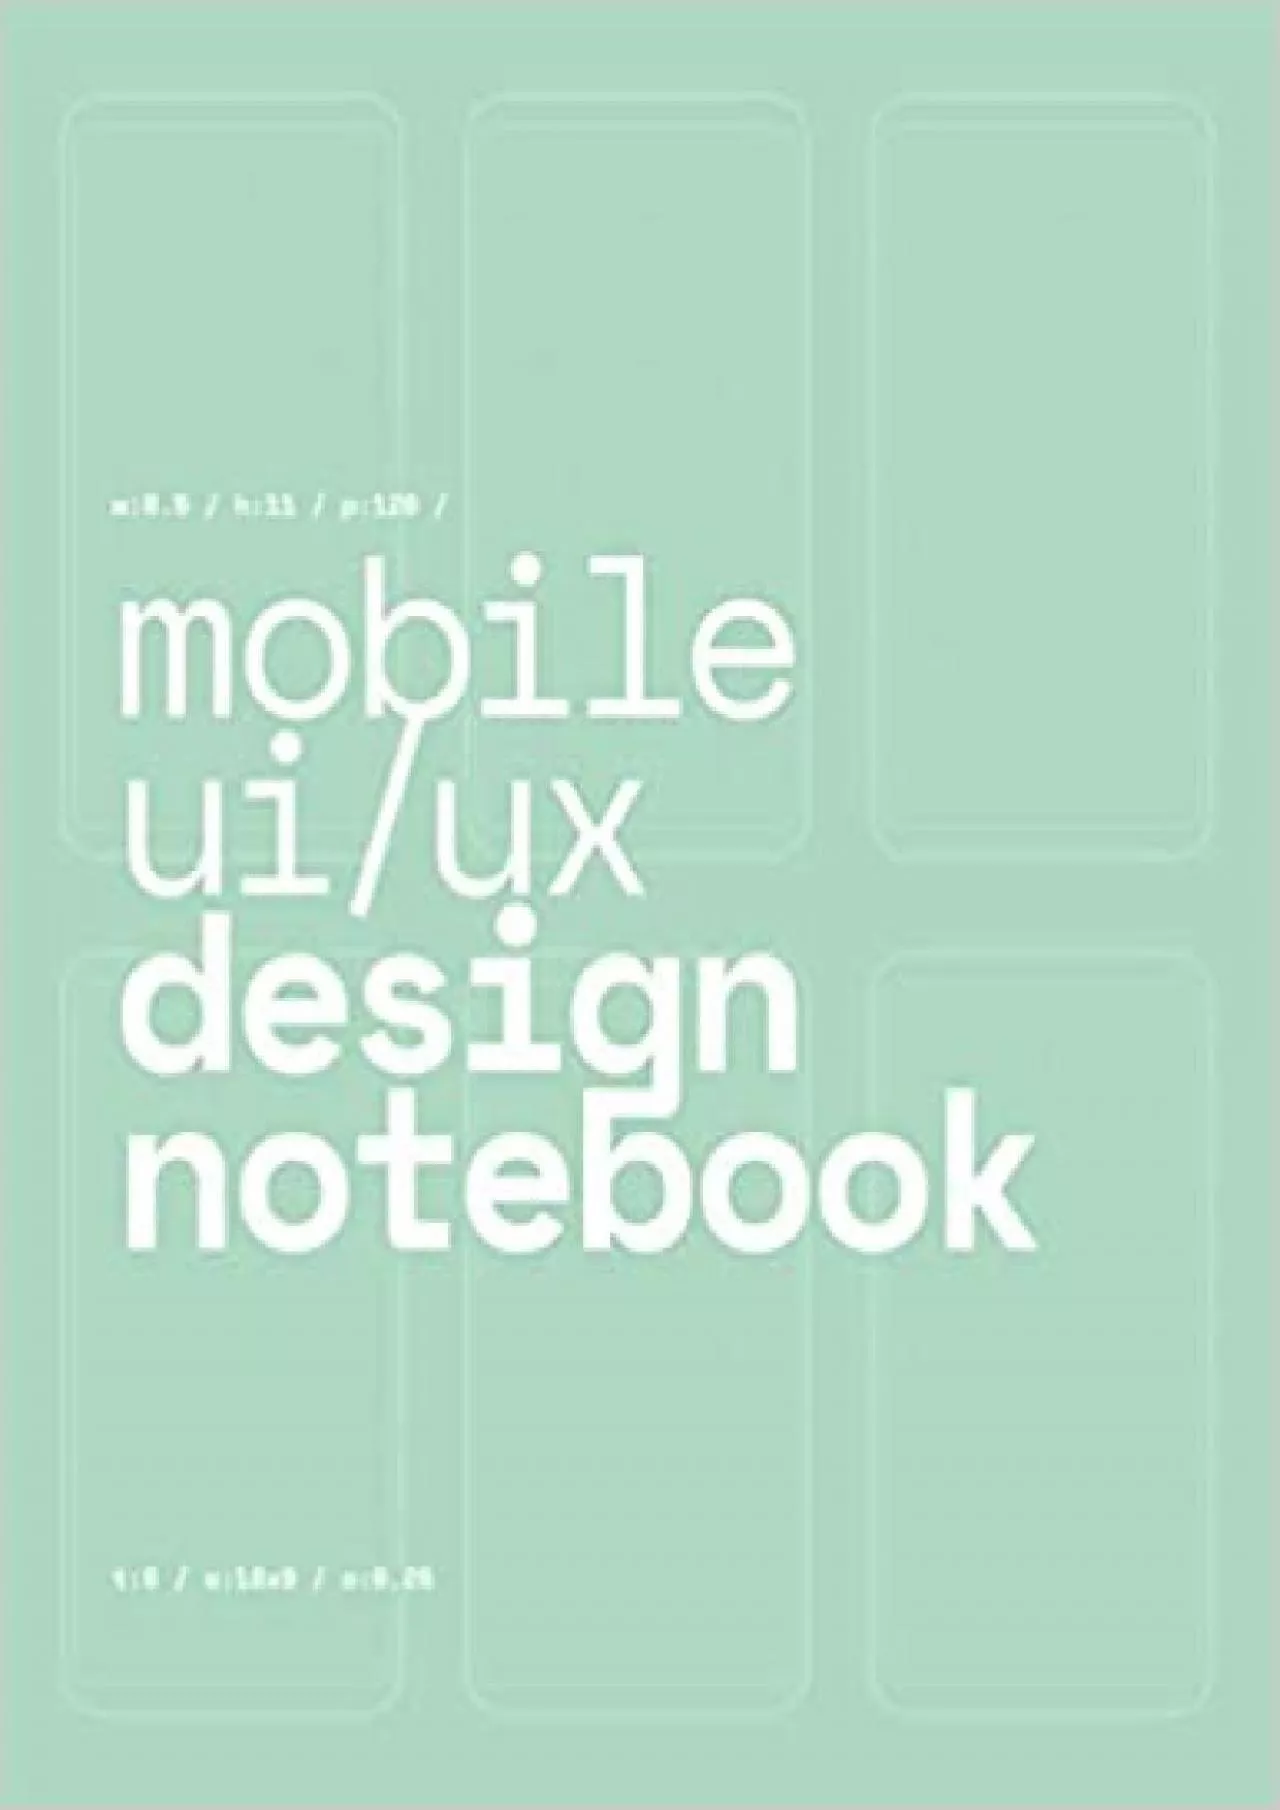 (DOWNLOAD)-Mobile UI/UX Design Notebook (Seafoam Green) User Interface & User Experience